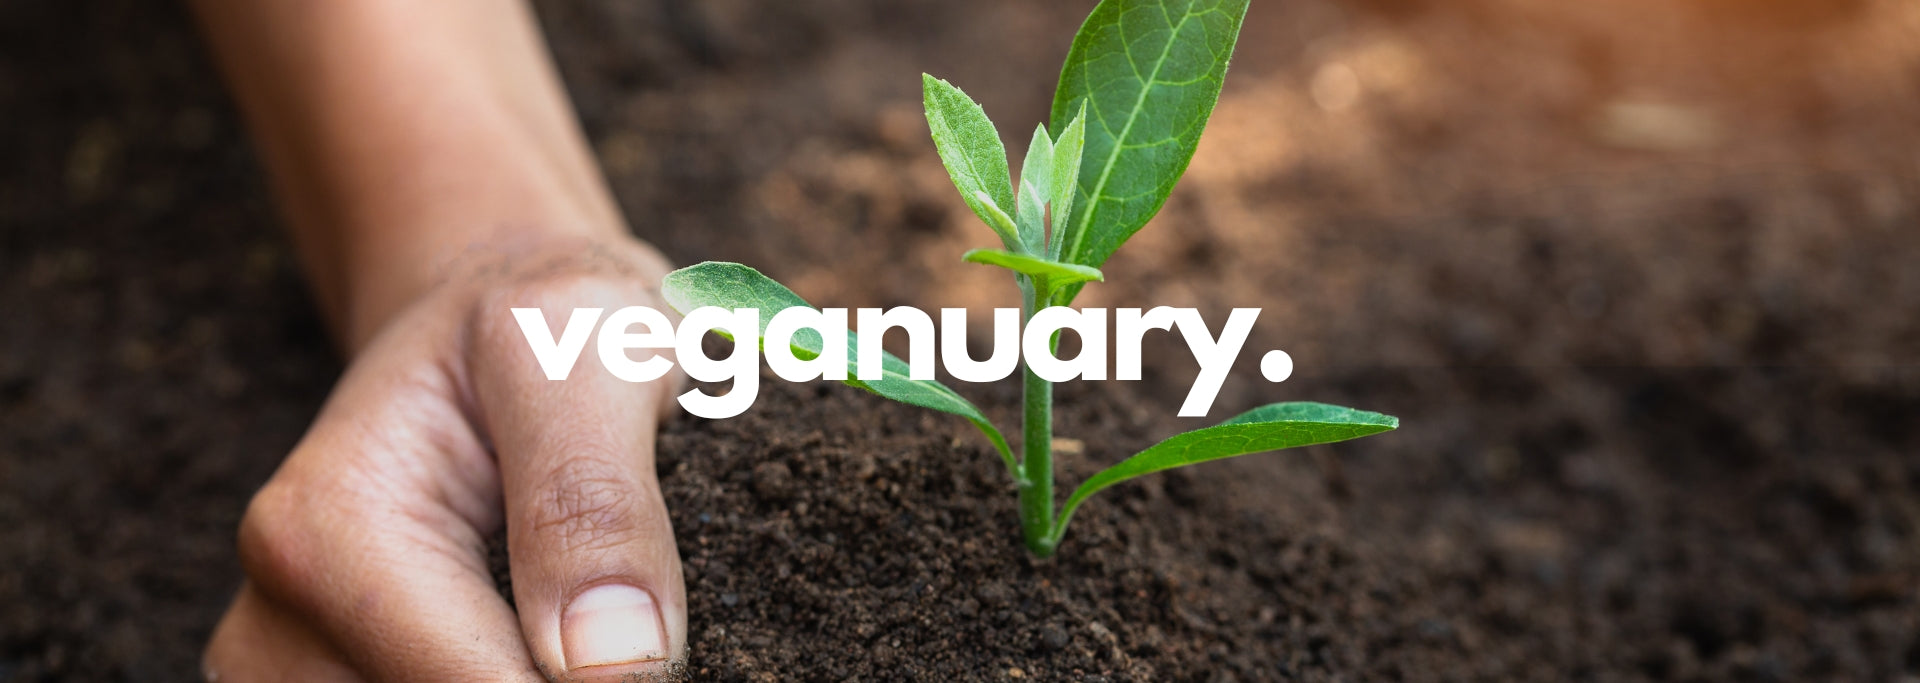 Veganuary- The What, Why, How and the Bounty of Nutrient-Rich, Organic Veggies